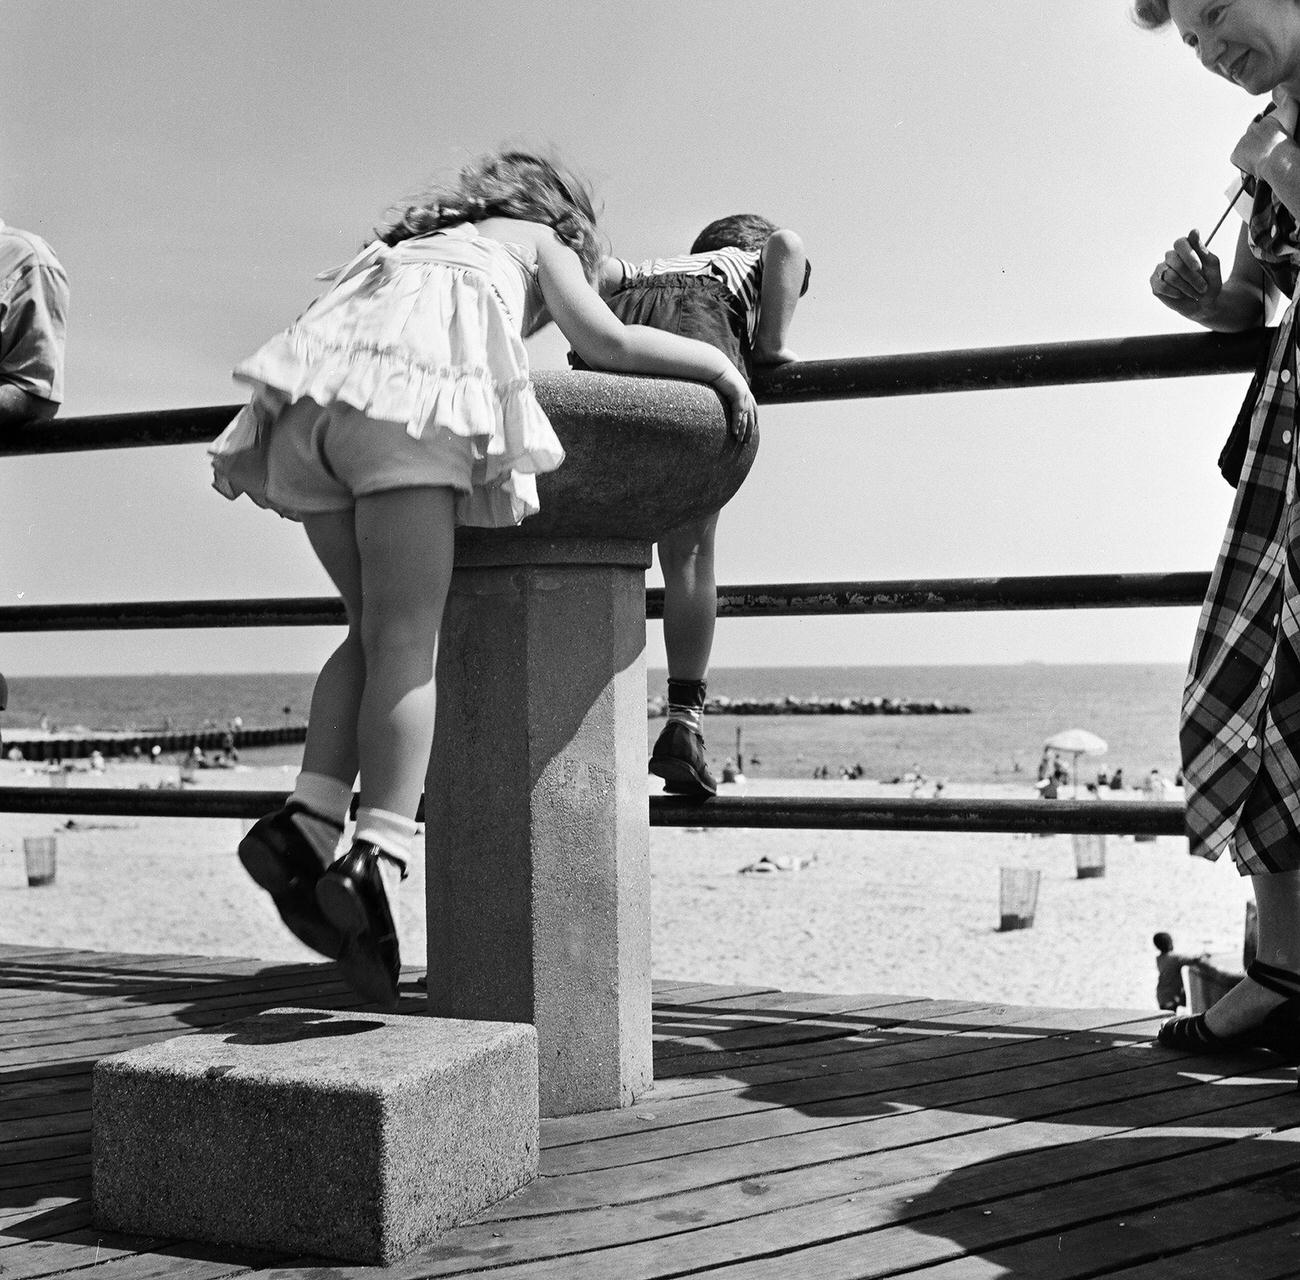 Girl Drinks From Water Fountain As Family Watches On Coney Island Boardwalk, 1948